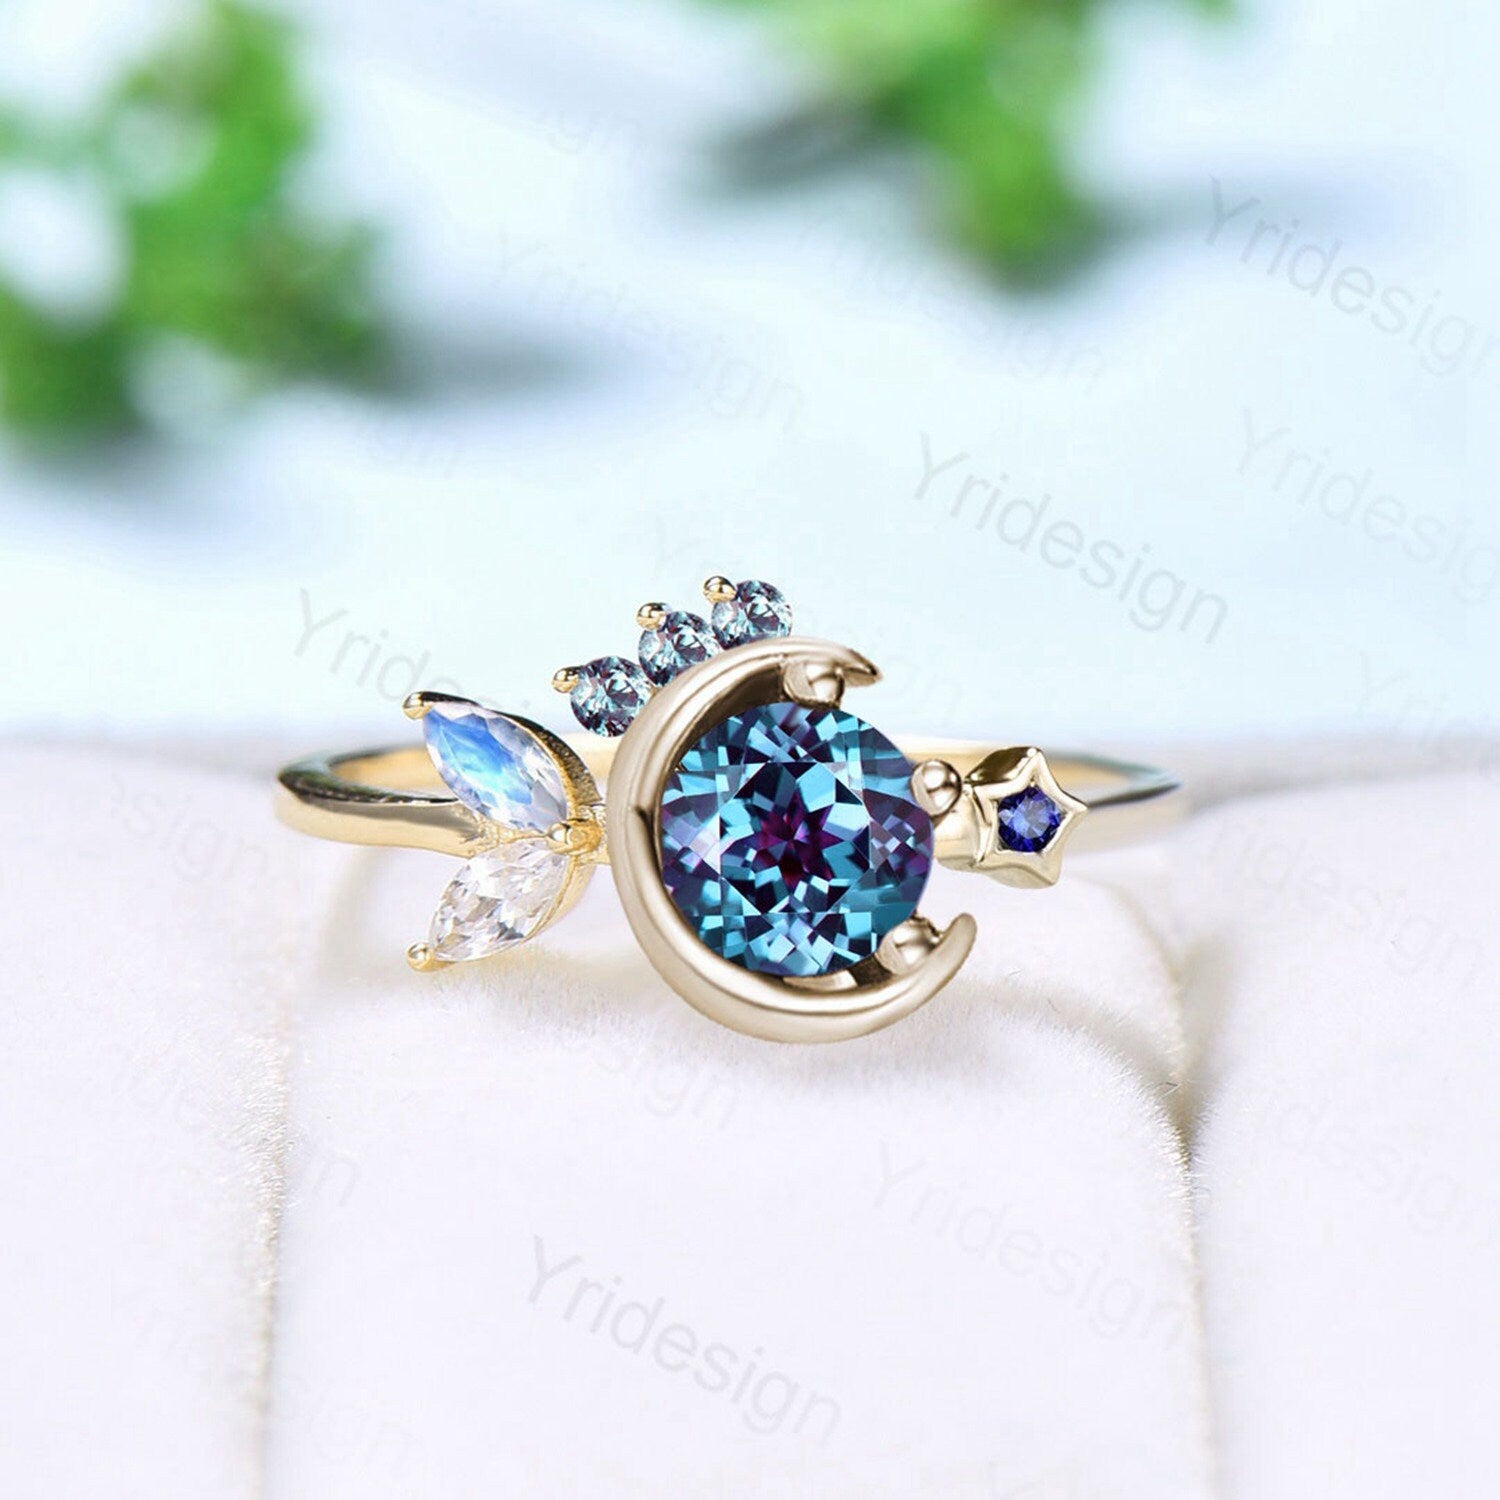 1CT Round Alexandrite Engagement Ring Sapphire Moonstone Wedding Ring Rose Gold Moon Engagement Ring Unique Personalized Star Promise Ring - PENFINE